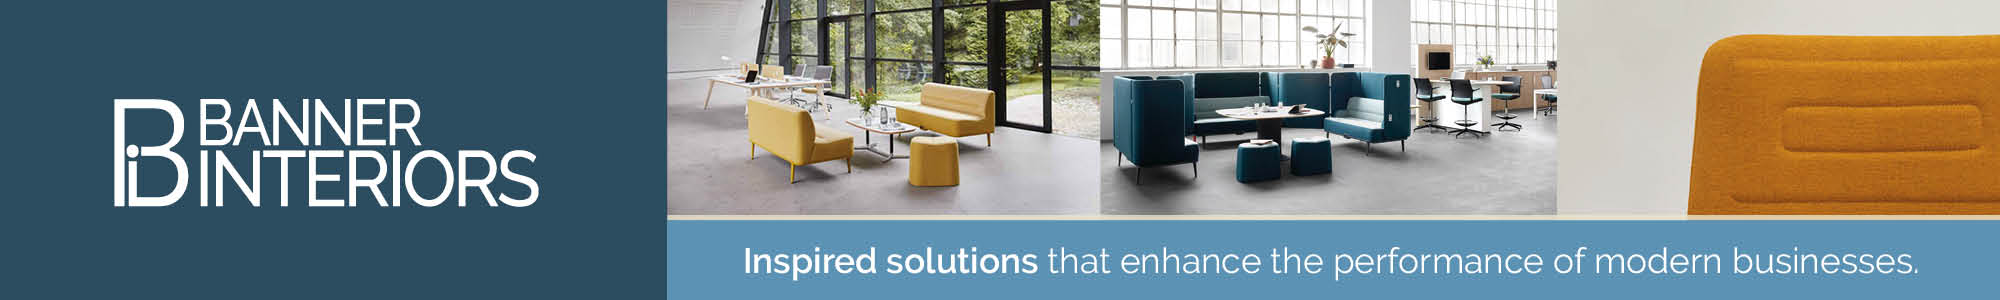 Banner Interiors _ Inspired solutions that enhance the performance of modern businesses.